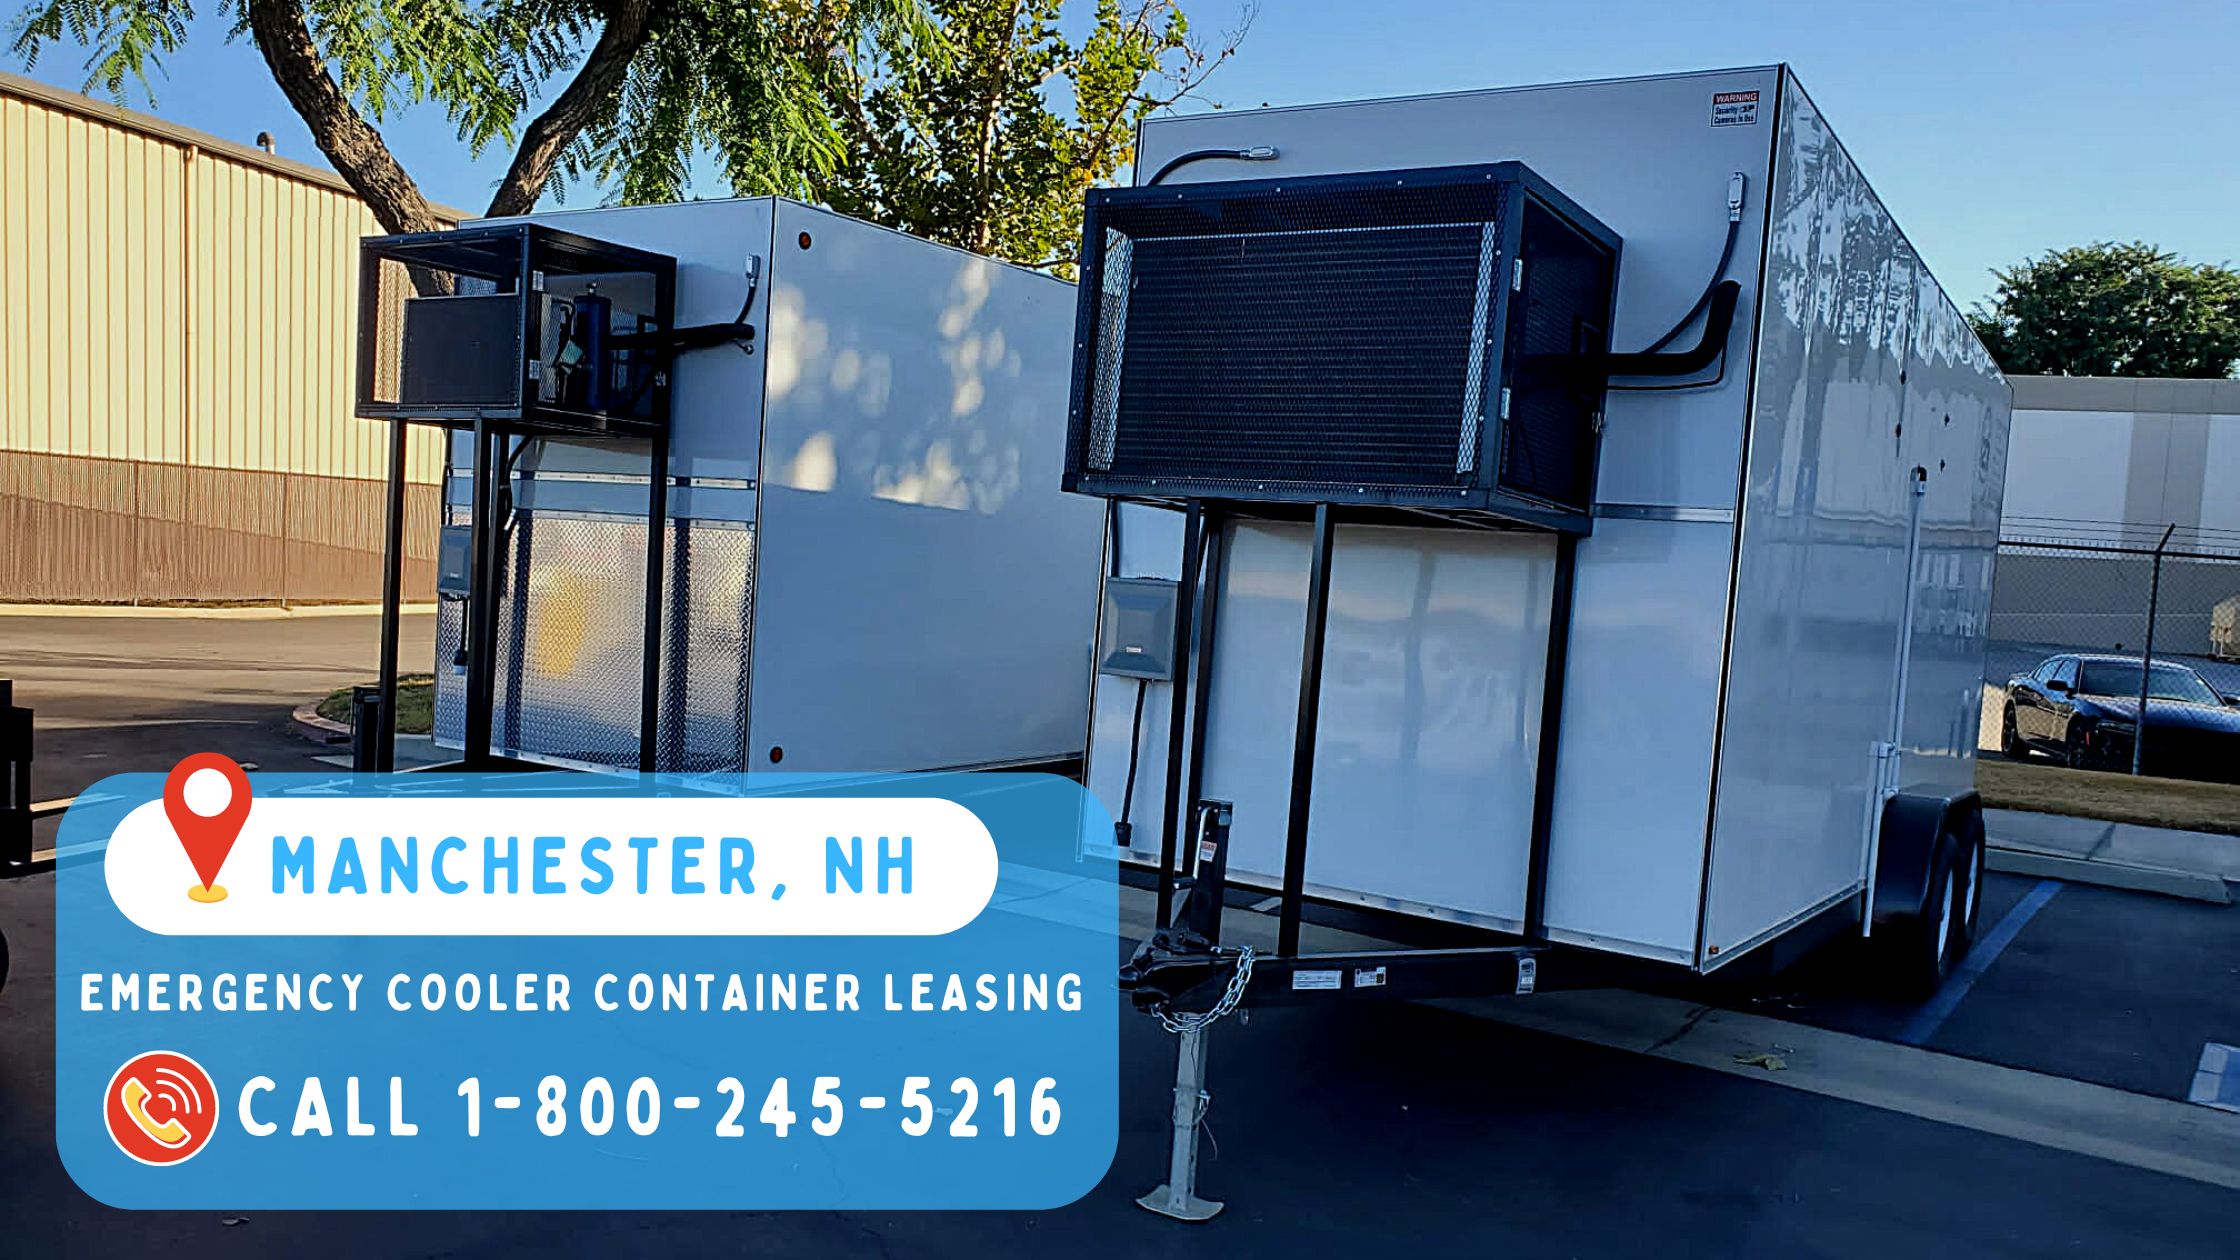 Emergency Cooler Container Leasing in Manchester